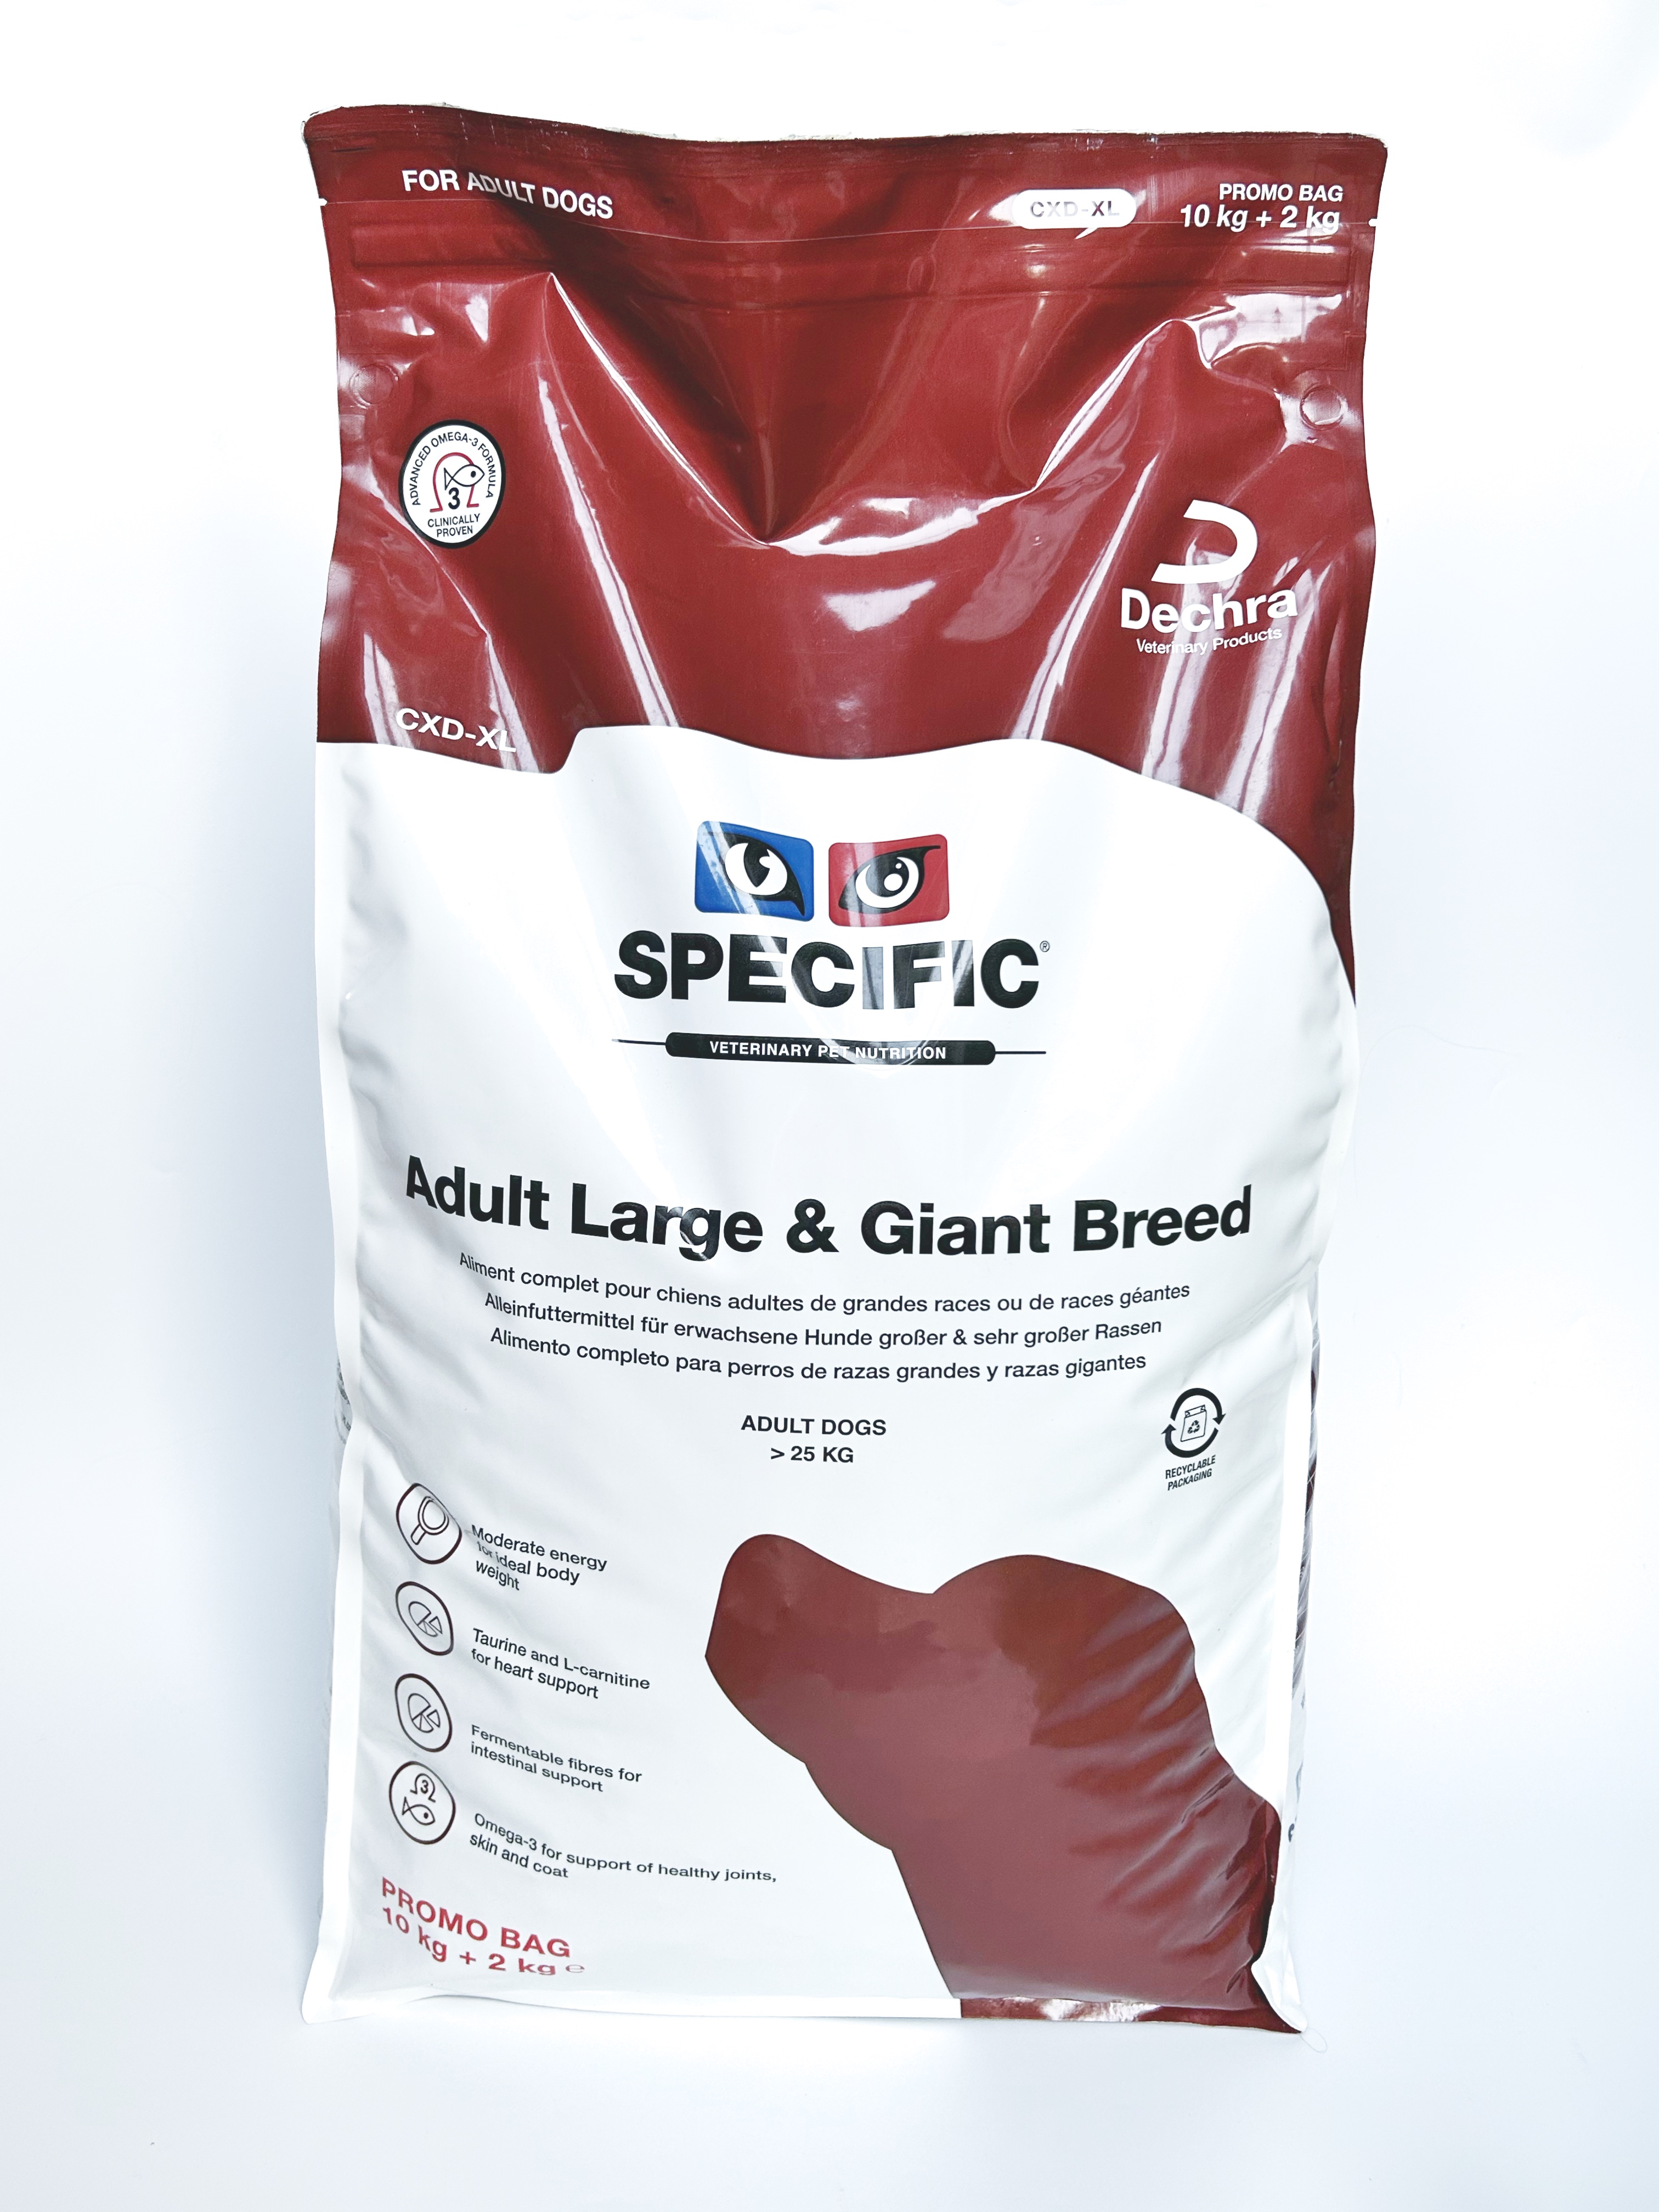 SPECIFIC CXD-XL Adult Large & Giant Breed 10+2kg Zdarma 12 kg